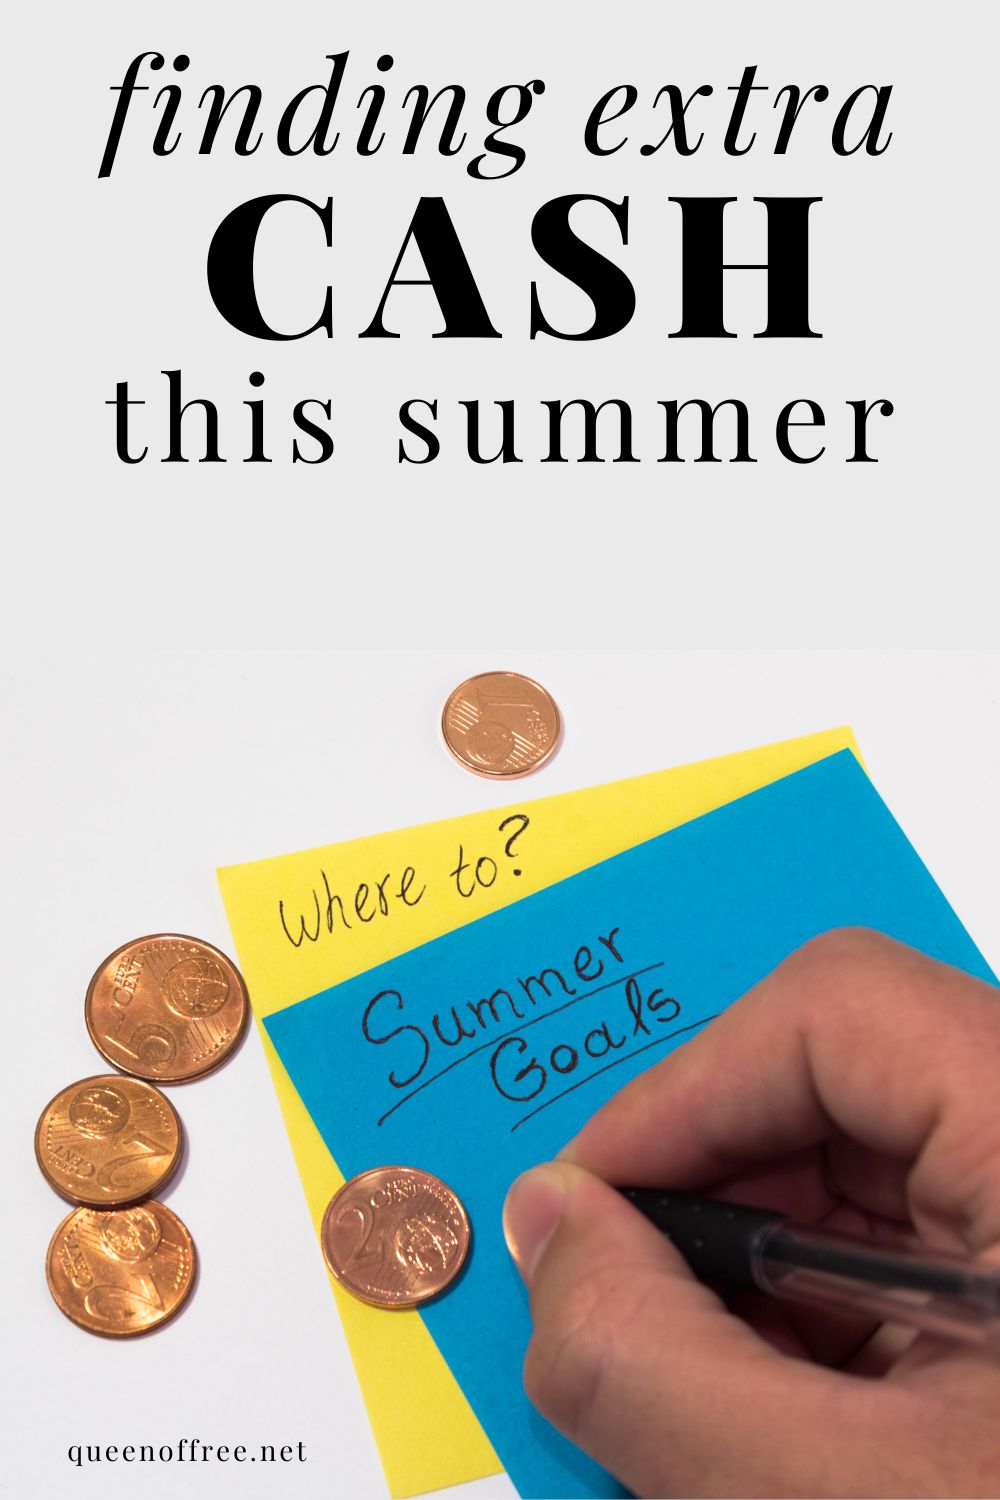 Summer expenses can really add up! Finding extra cash doesn't have to be hard, though. Check out these ideas to fund your summer fun.